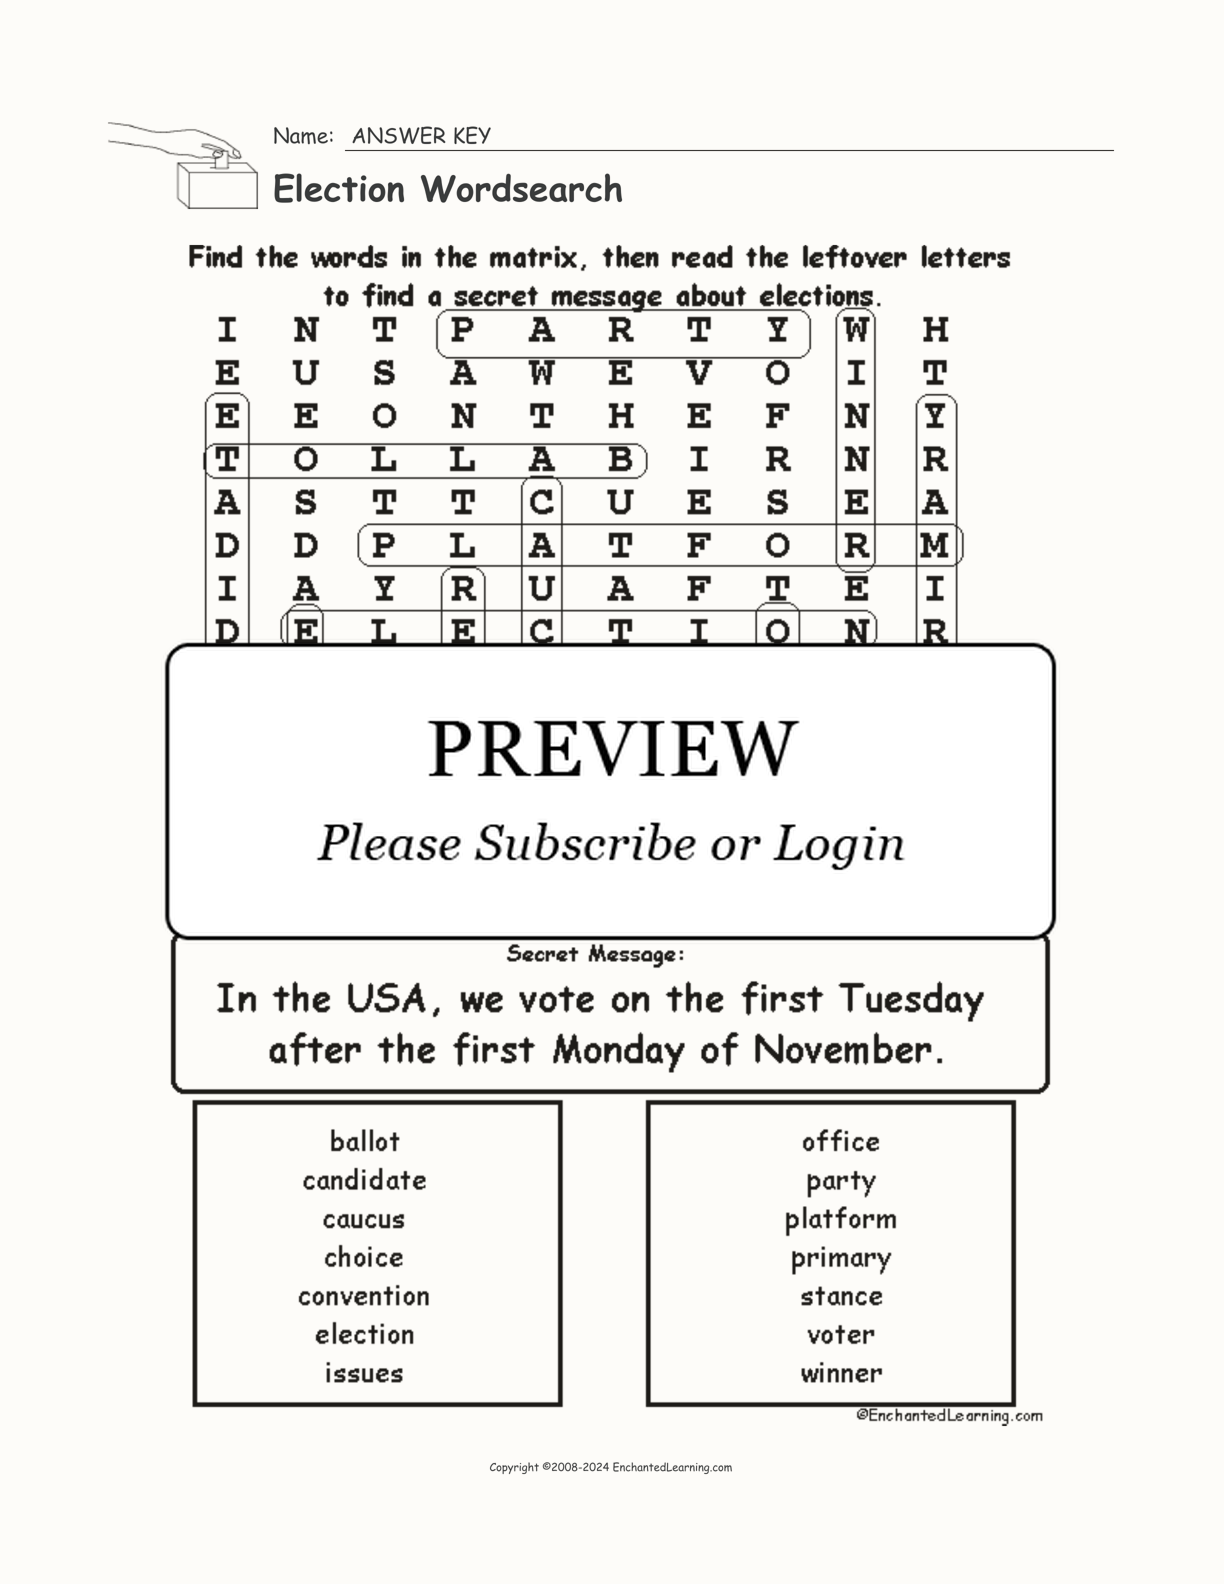 Election Wordsearch interactive worksheet page 2